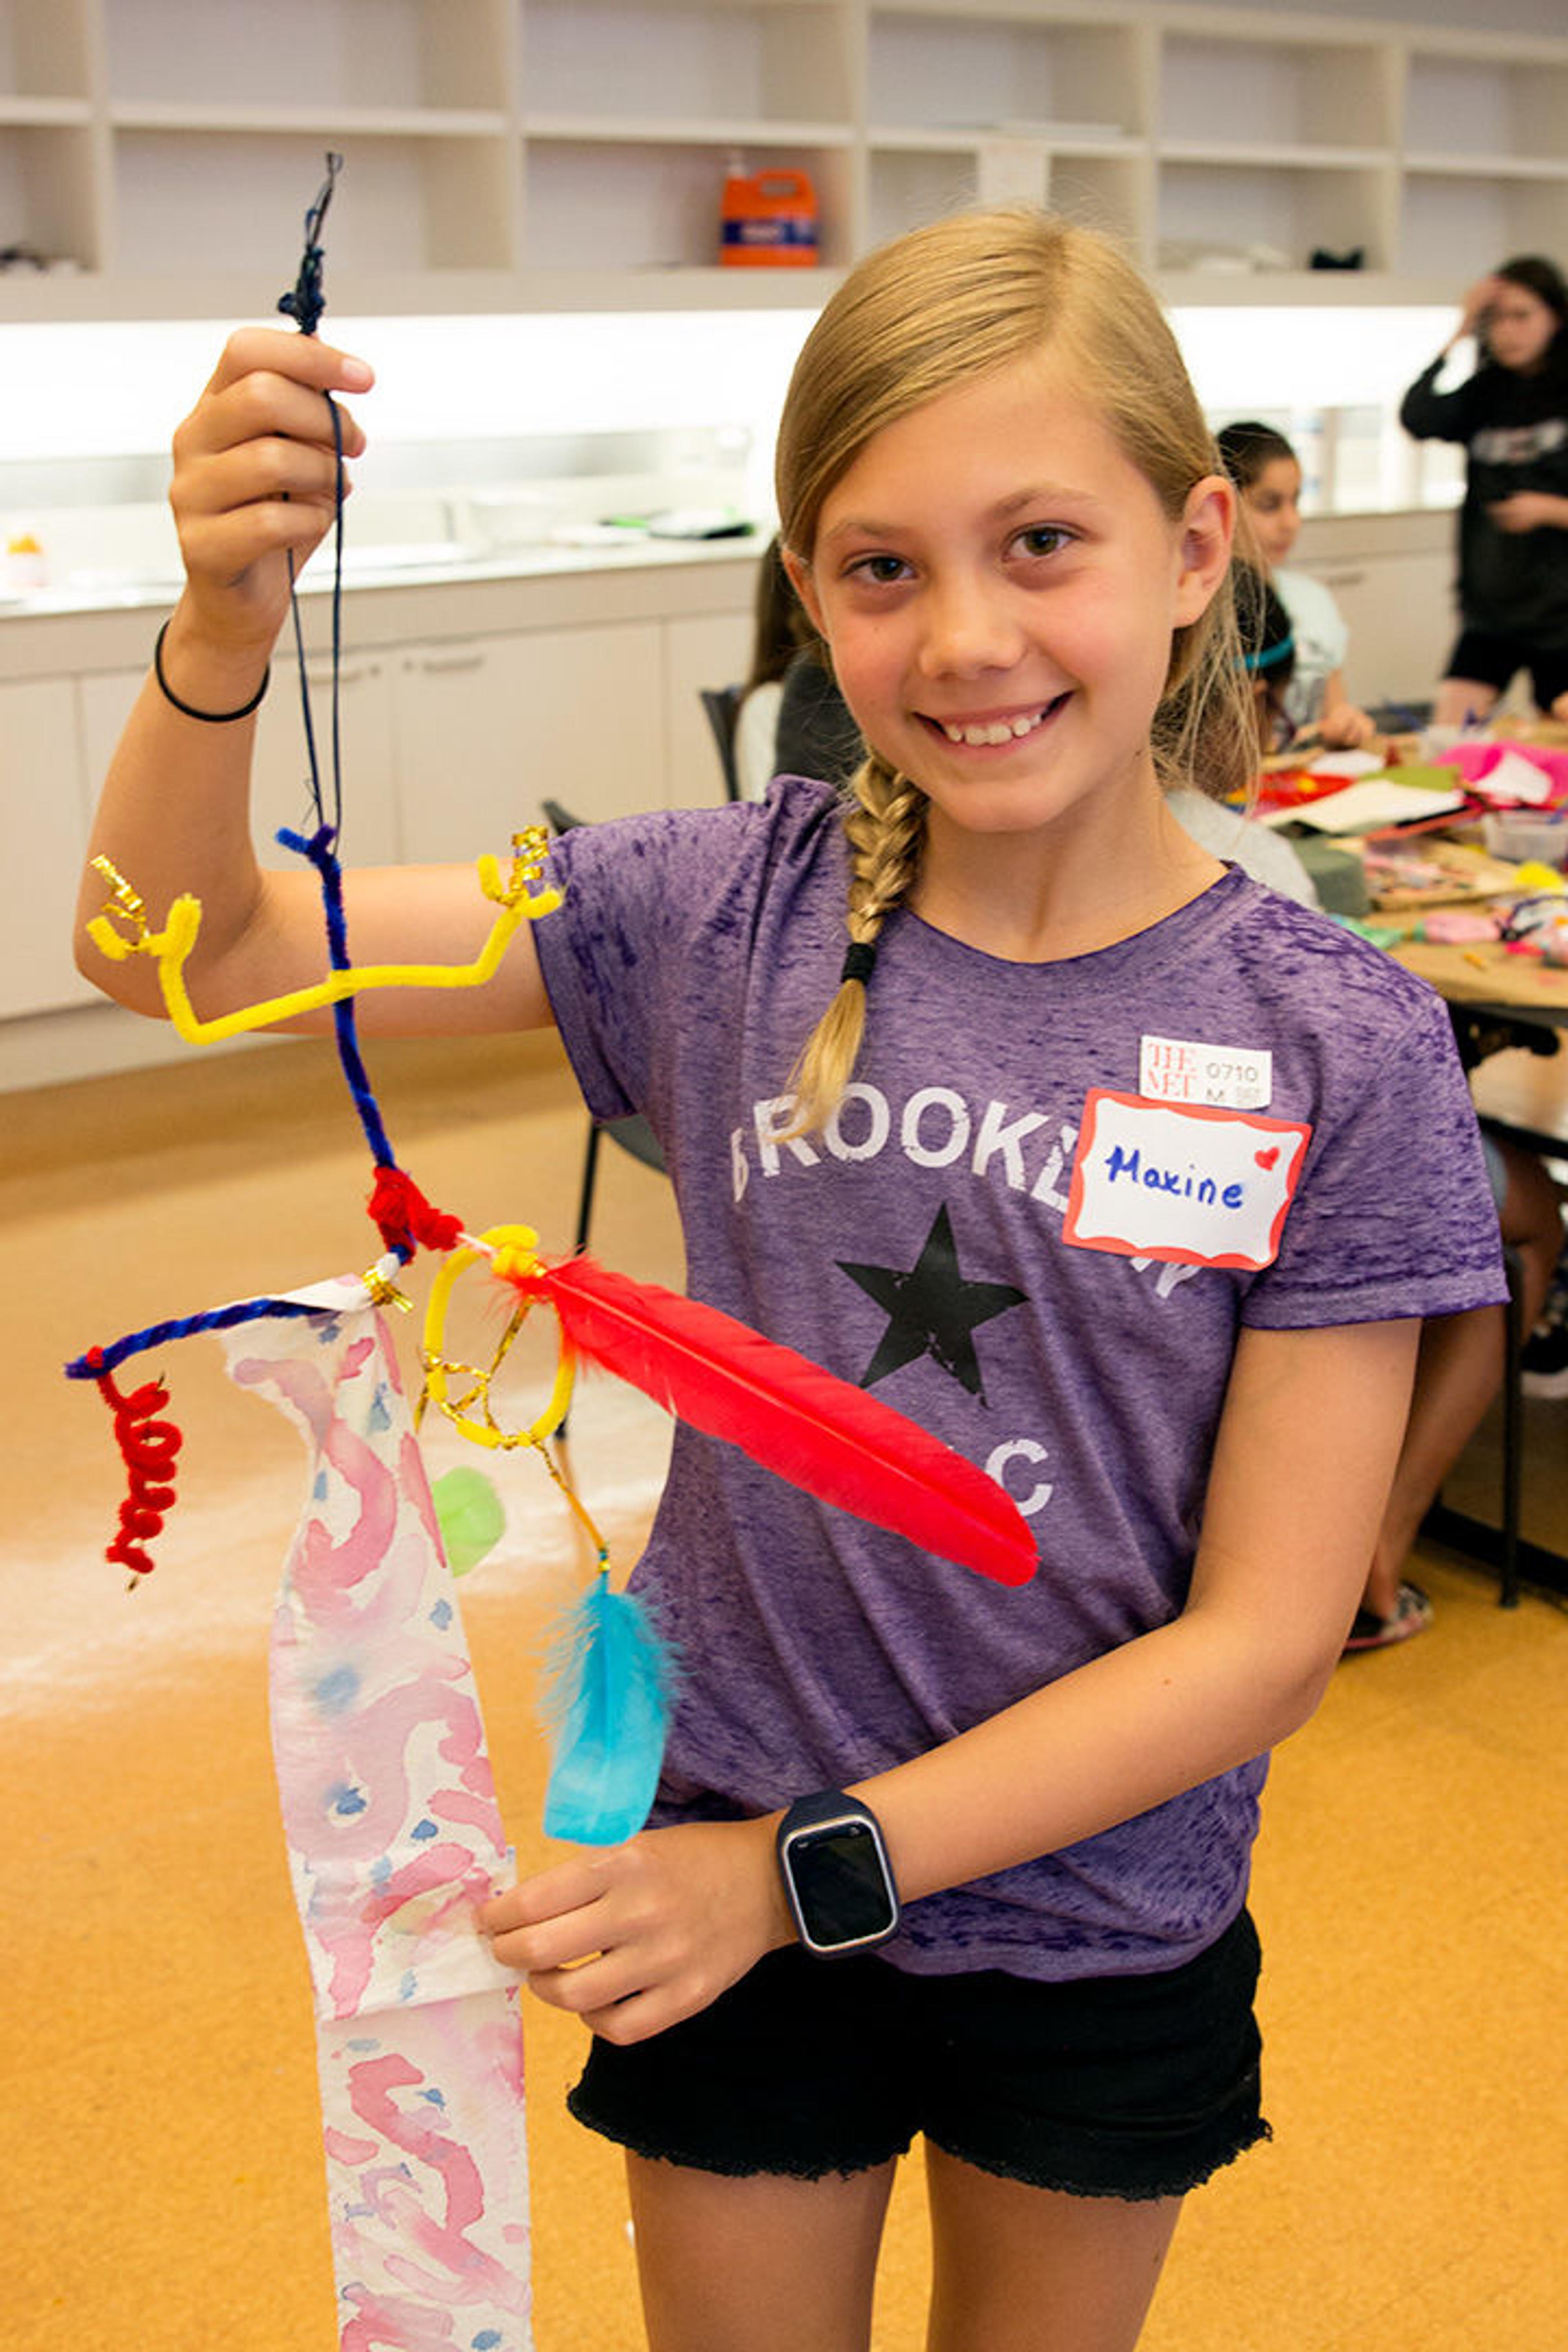 Max holds up her finished mobile made of dyed cloth, pipe cleaners, string, and other materials.